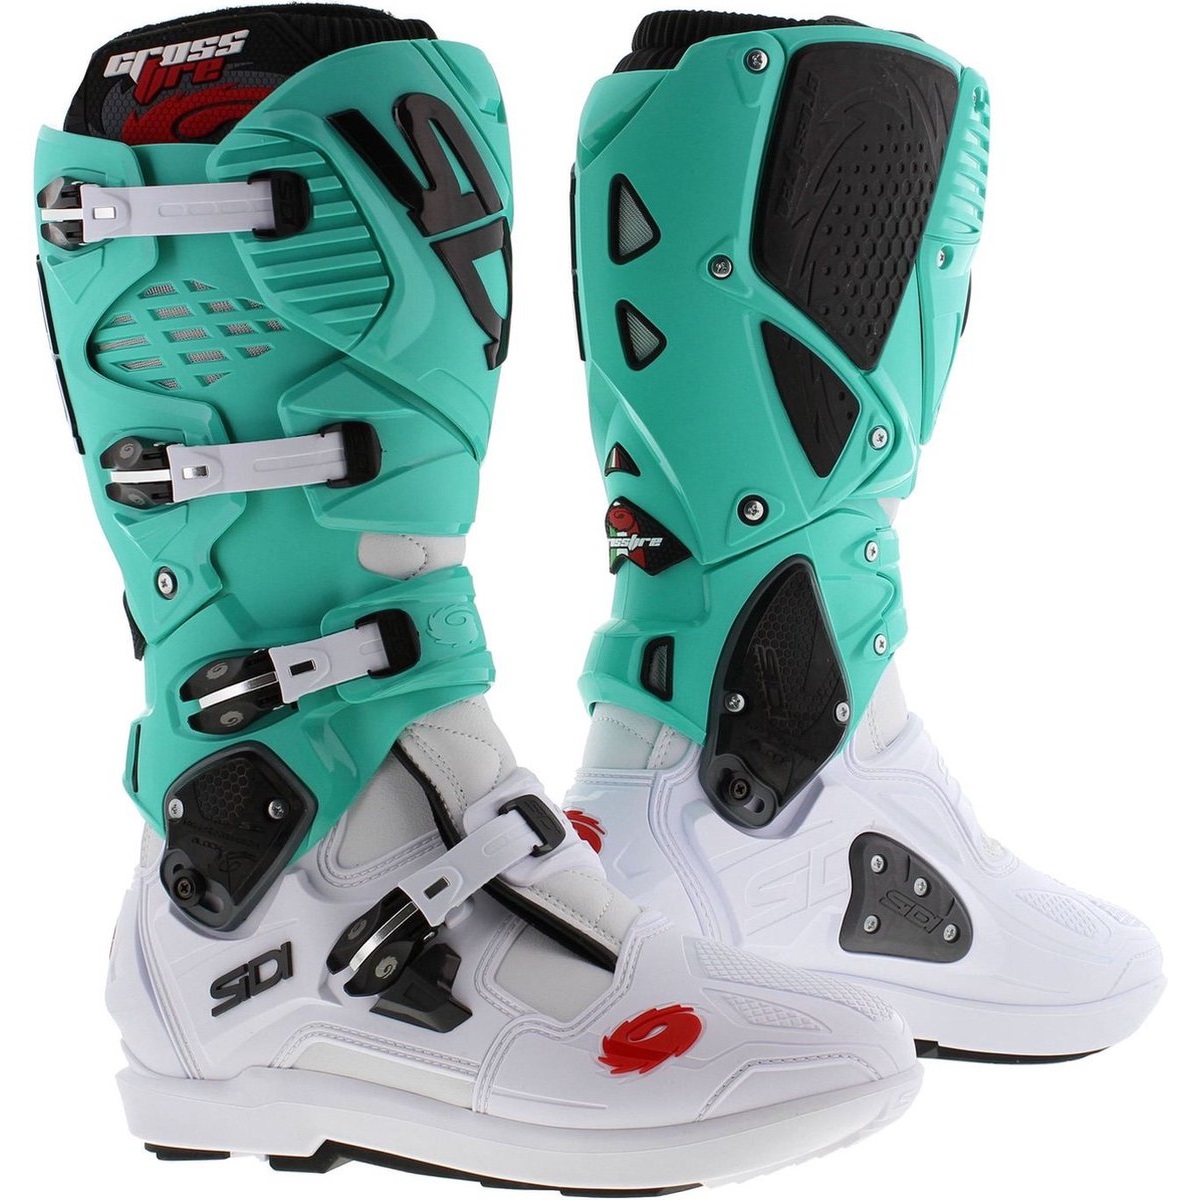 Sidi Crossfire 3 SRS Limited Edition White Mint Boots - Sixstar Racing